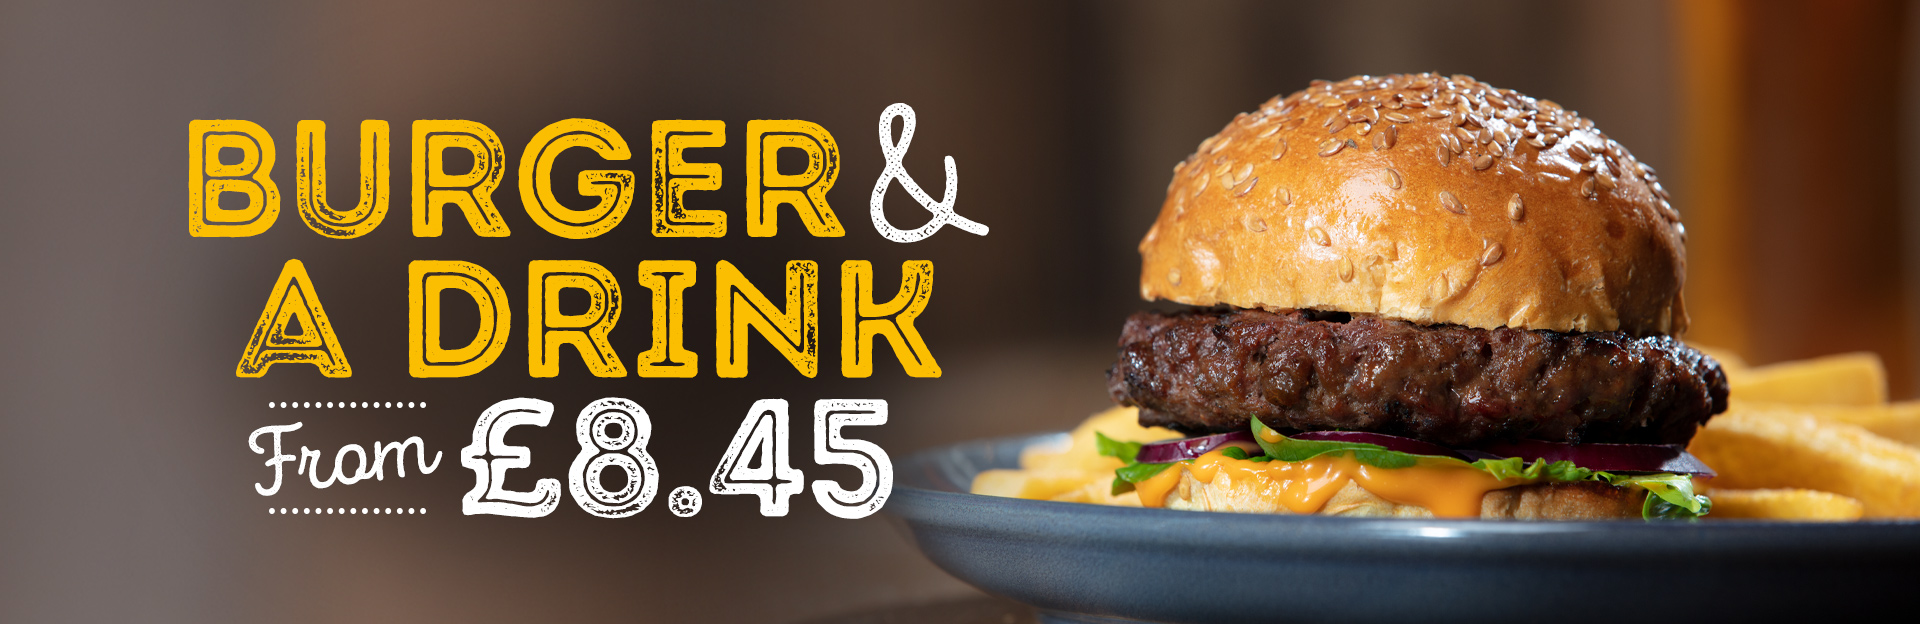 Burger & Drink at The Beverley